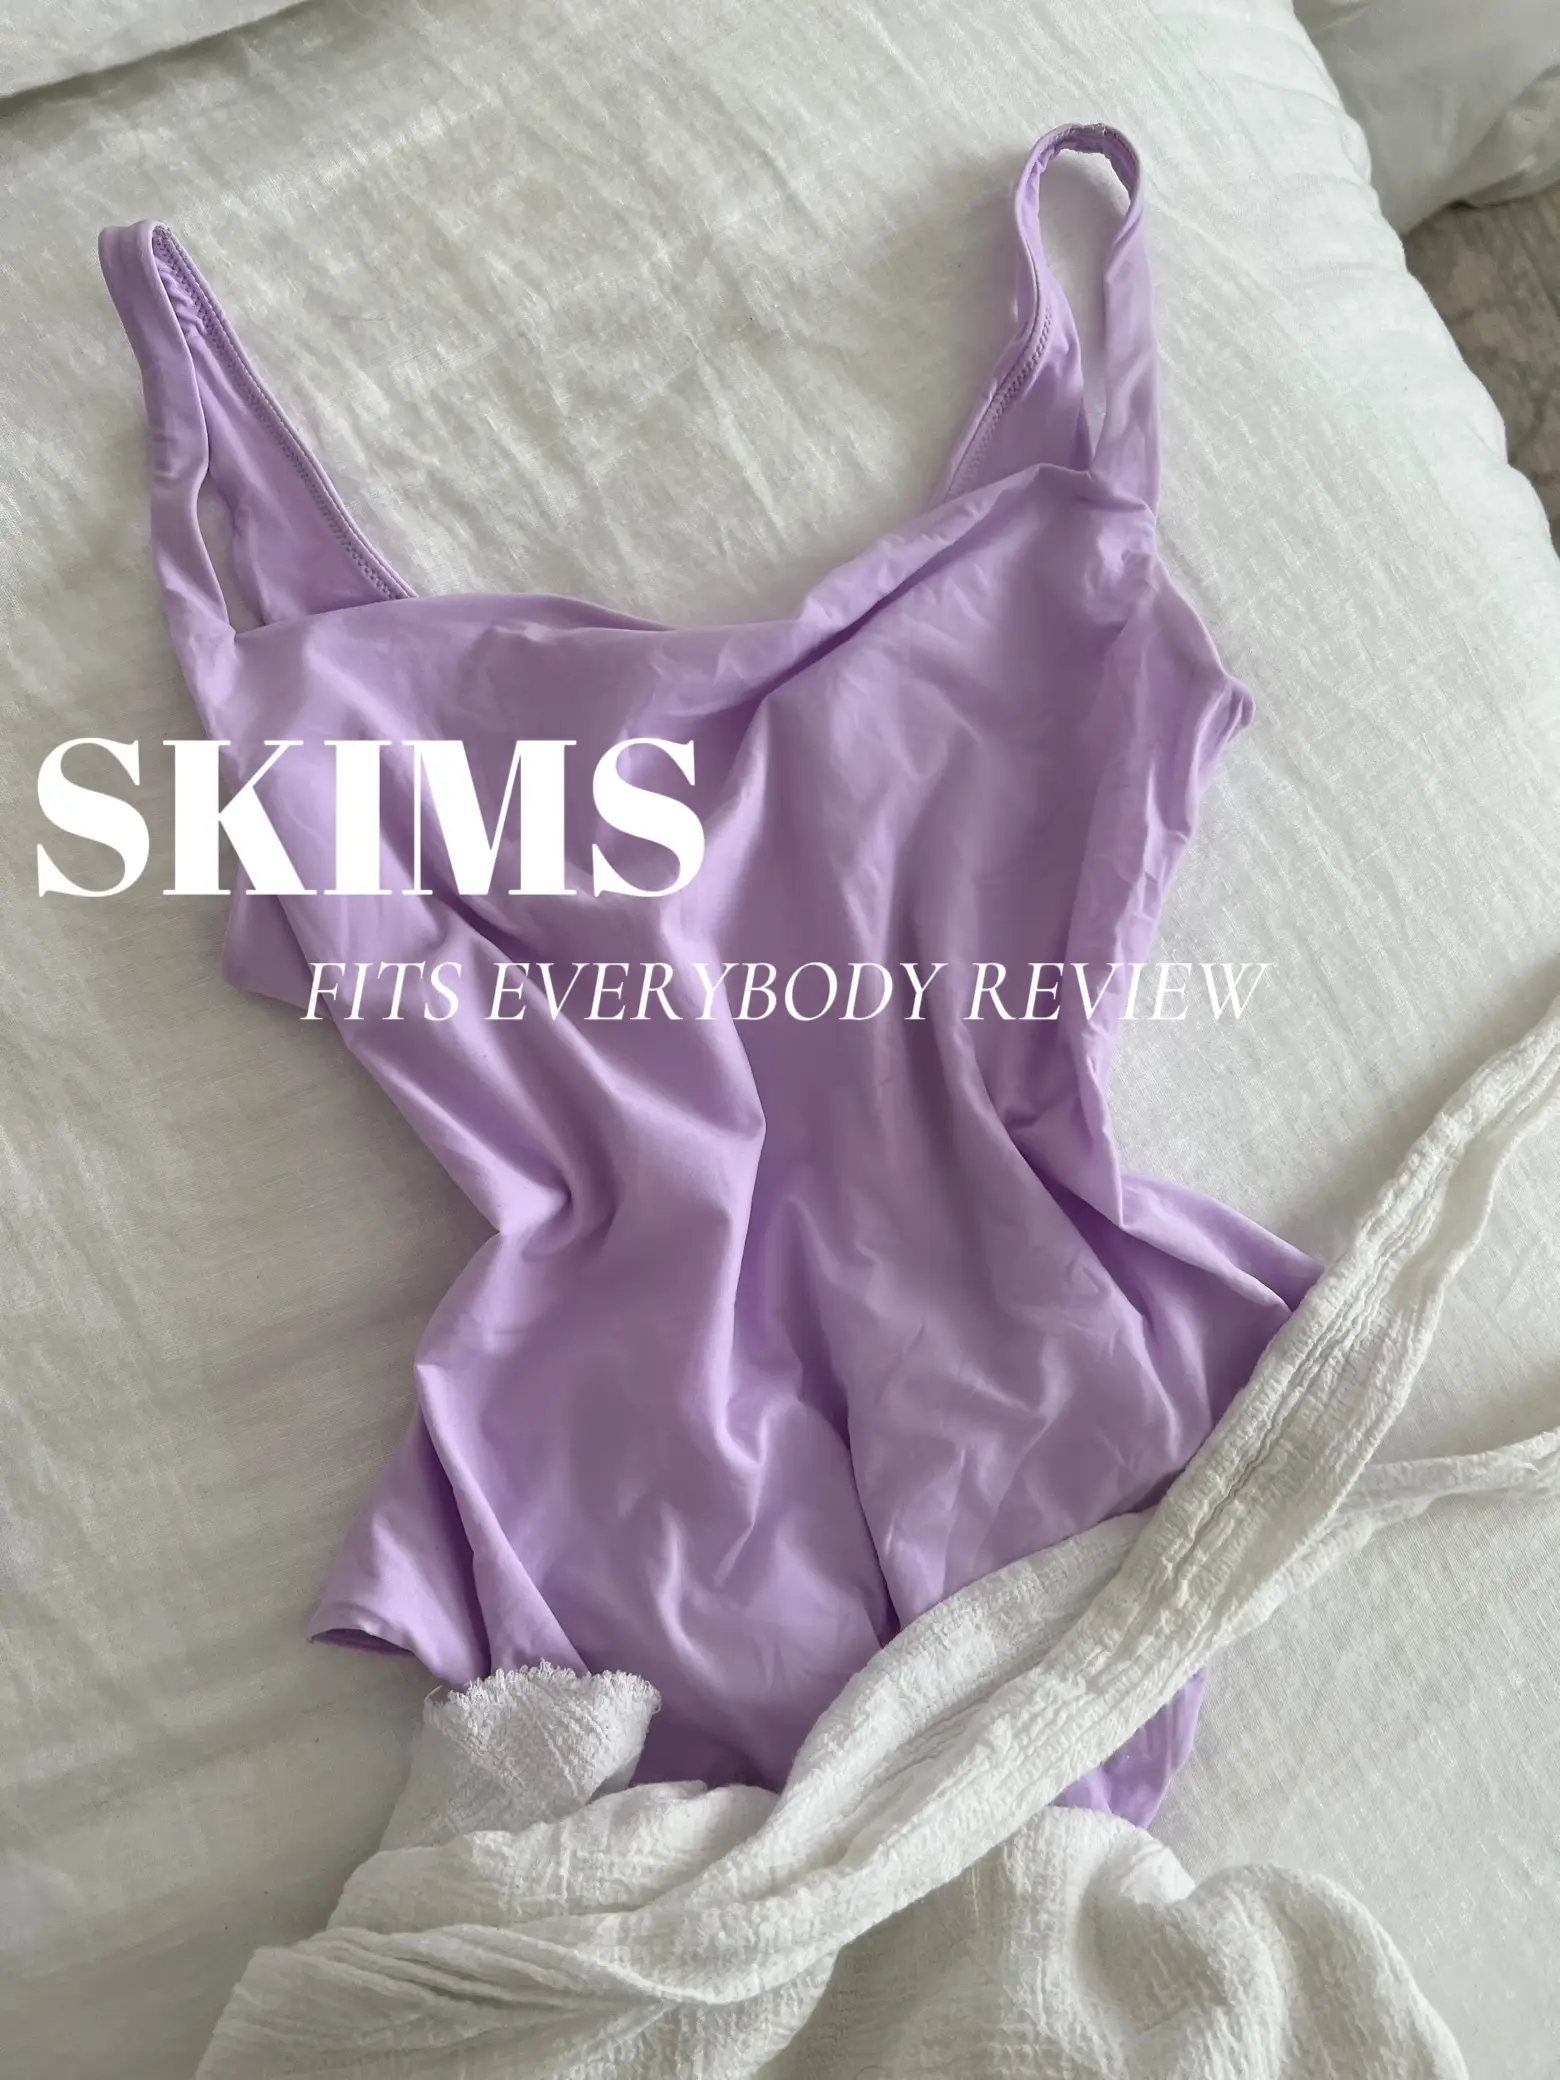 Skims Honest Review and Try-on Haul Boy Shorts Triangle Bra Boxers